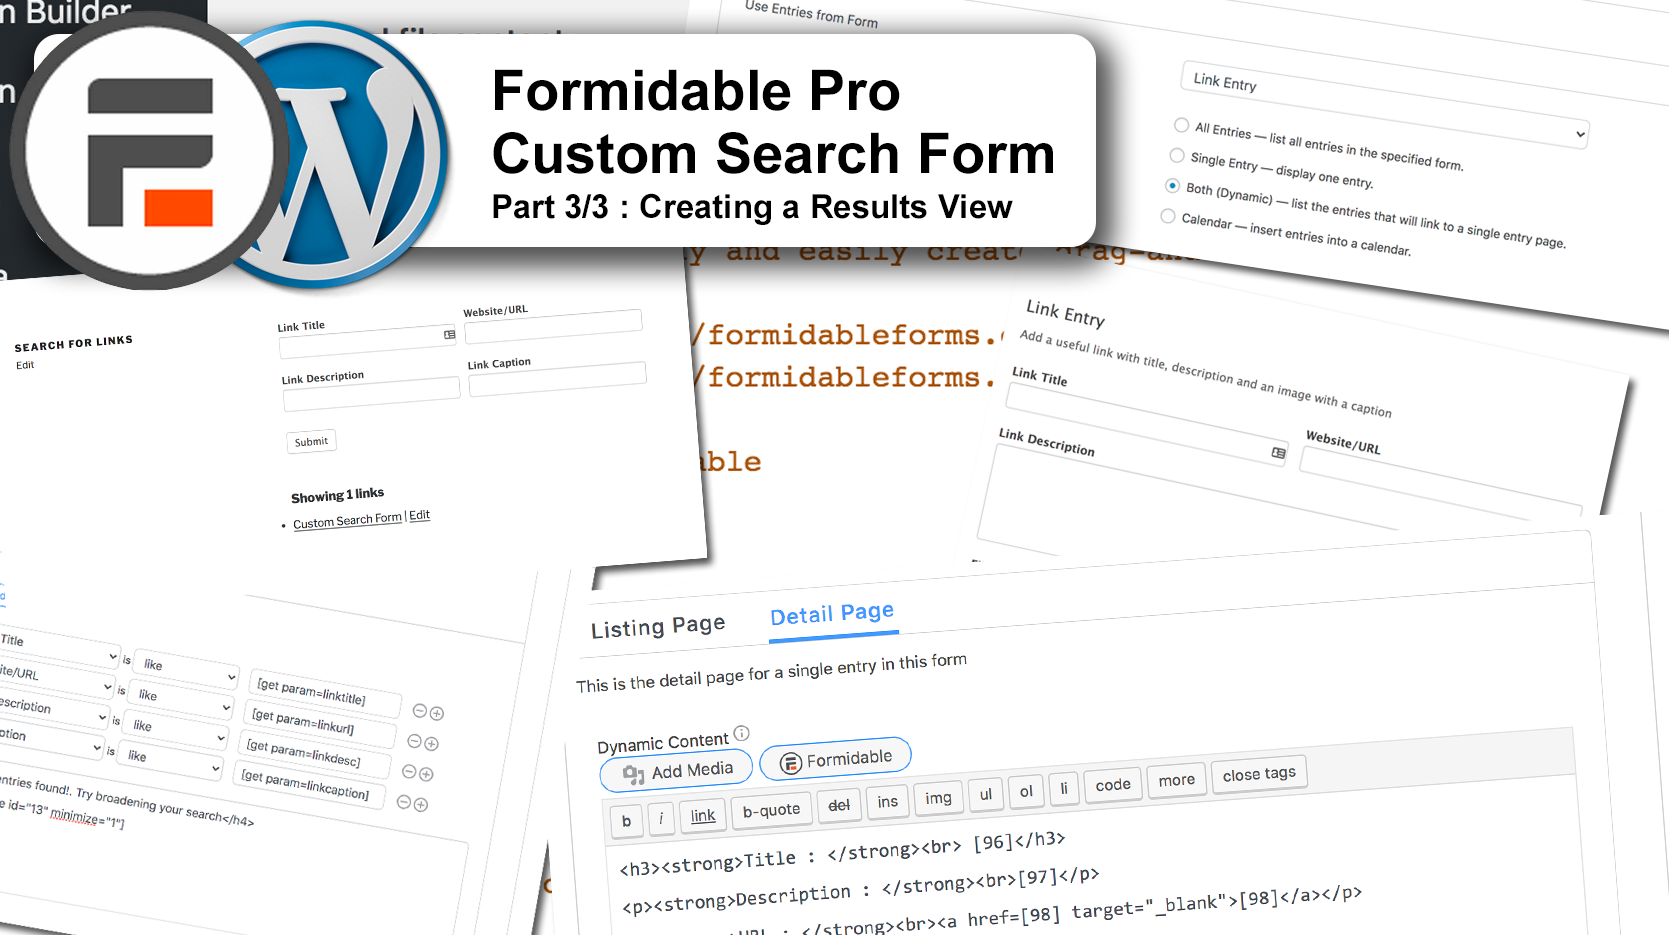 Formidable Pro Custom Search Form part 3